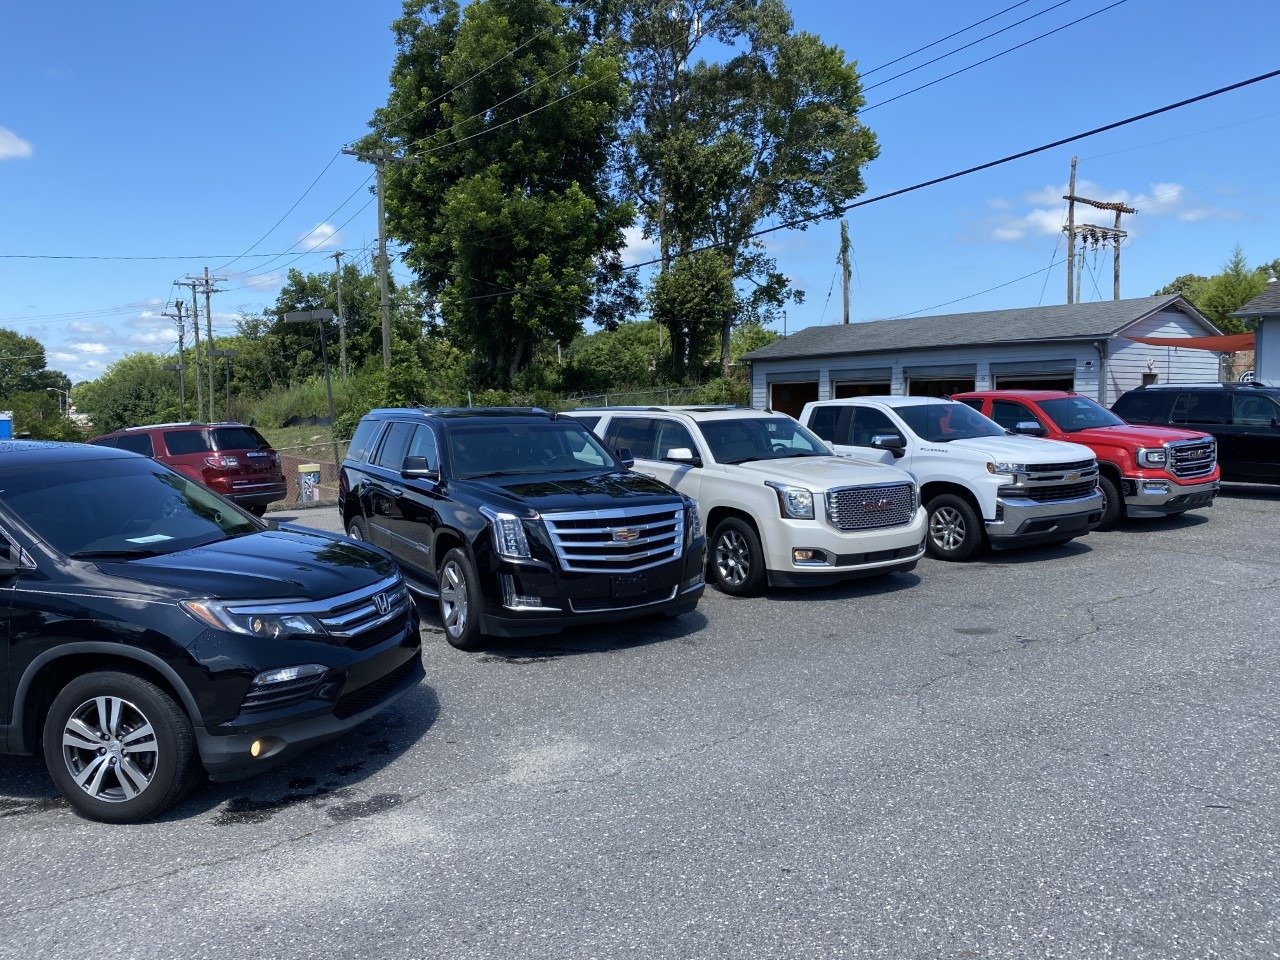 Certified Pre-Owned Cars For Sale in Gastonia, NC